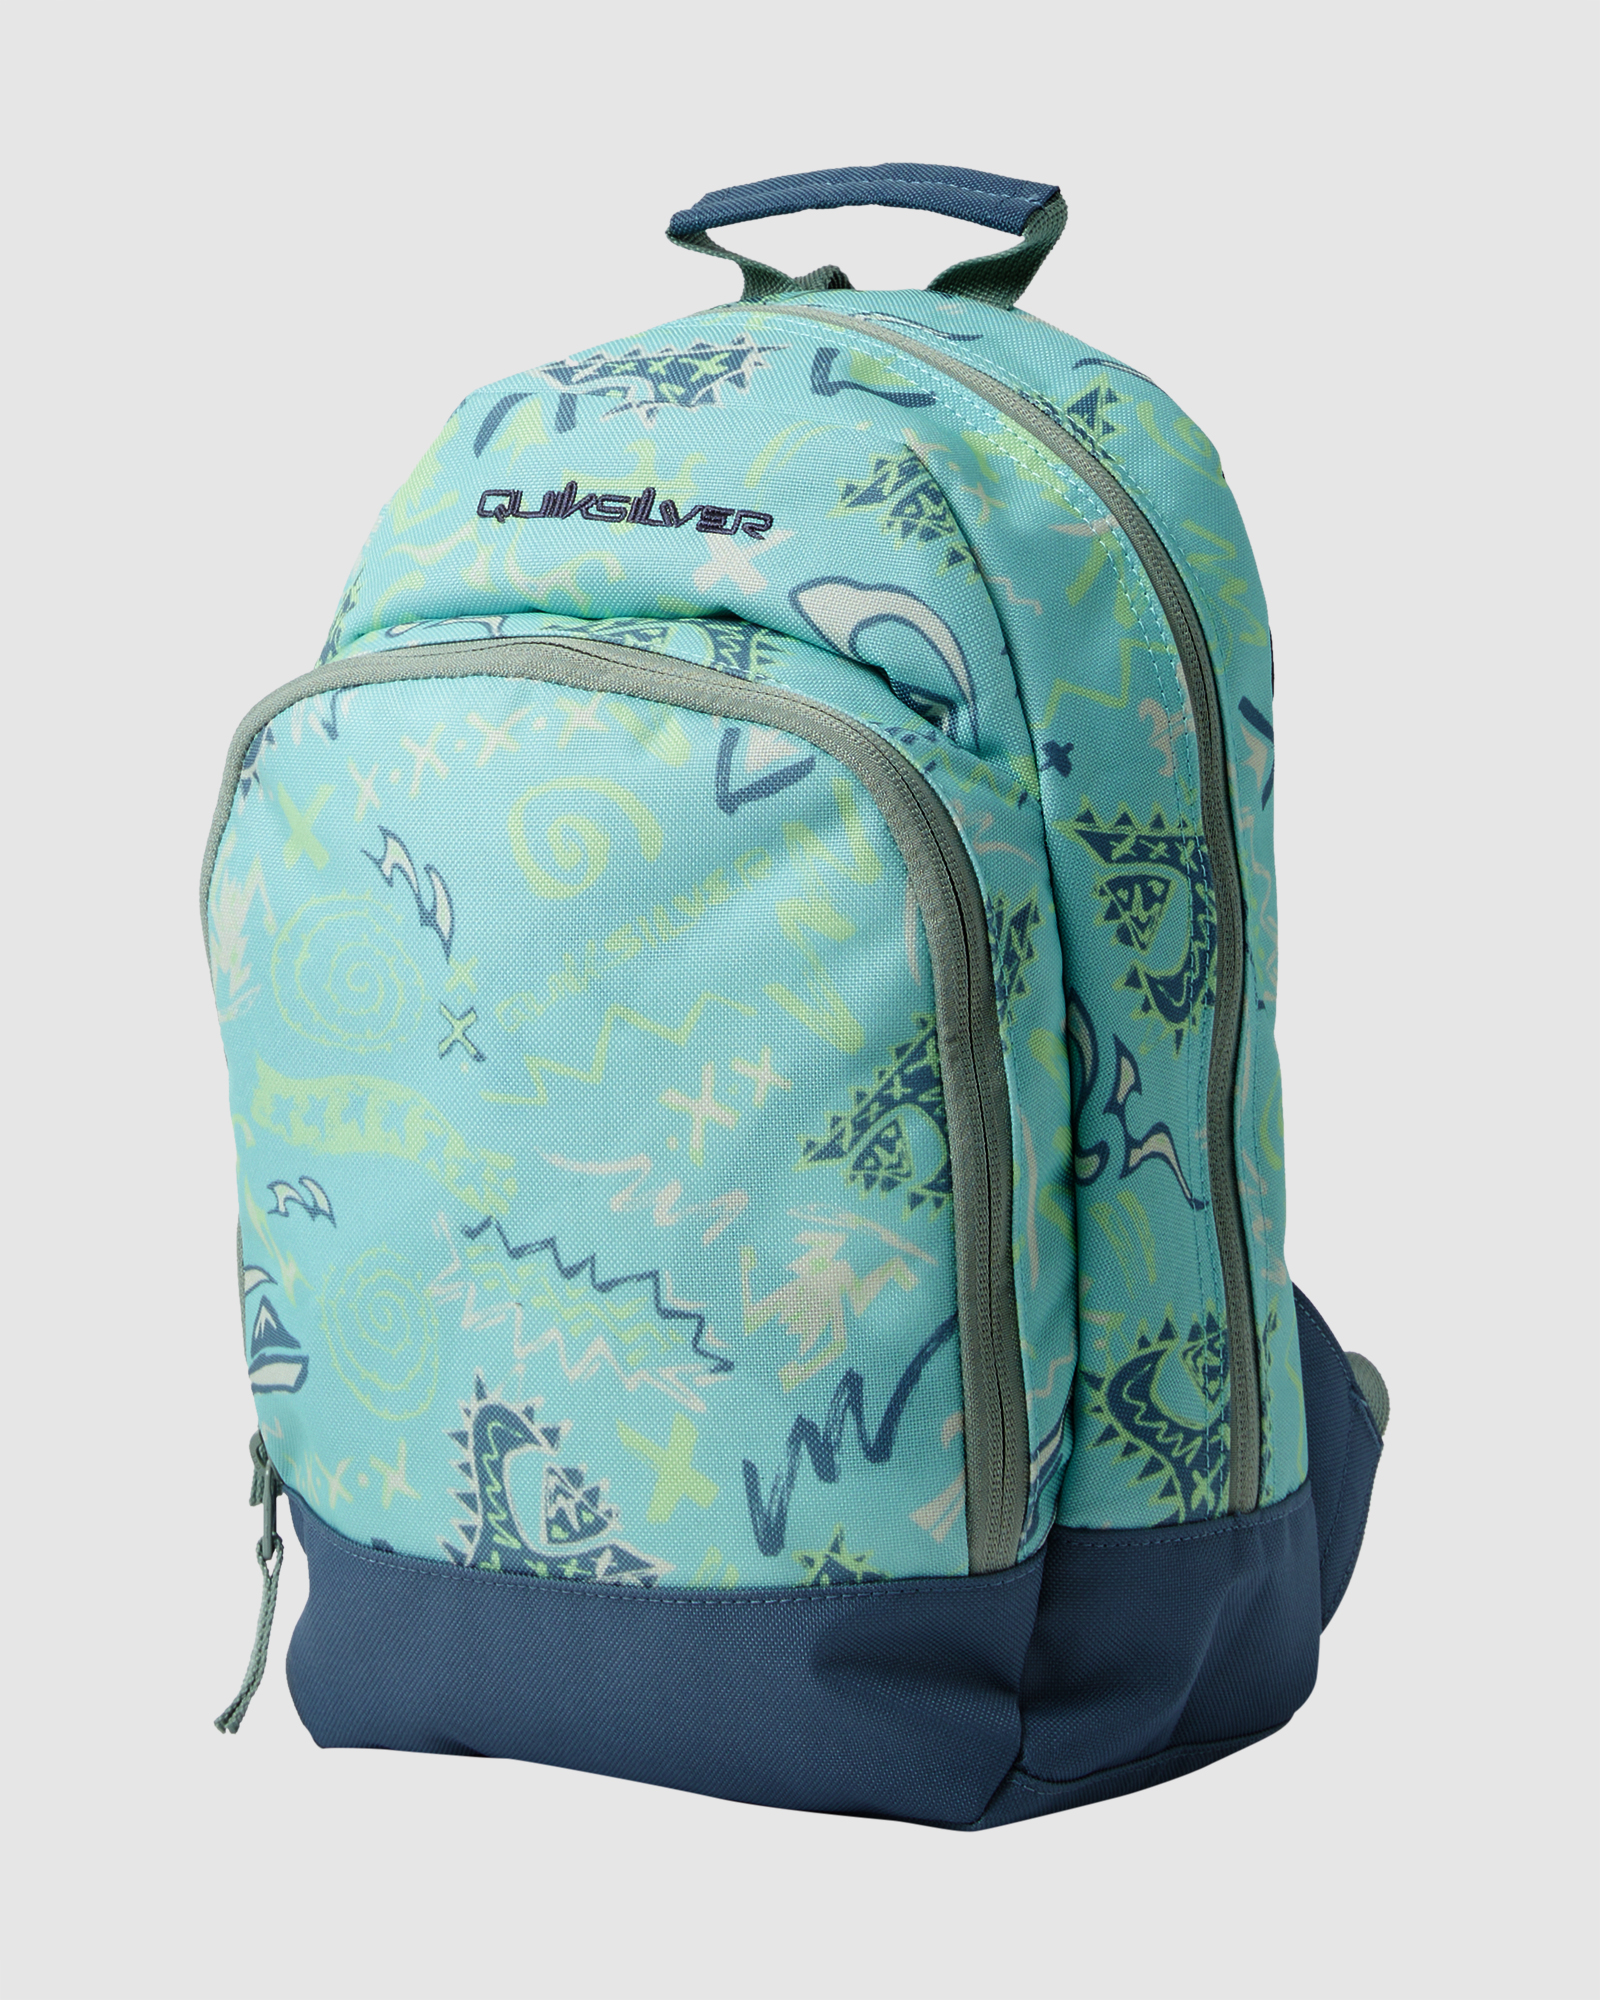 Quiksilver Chomping 12L Small Turquoise | Pastel Backpack SurfStitch 